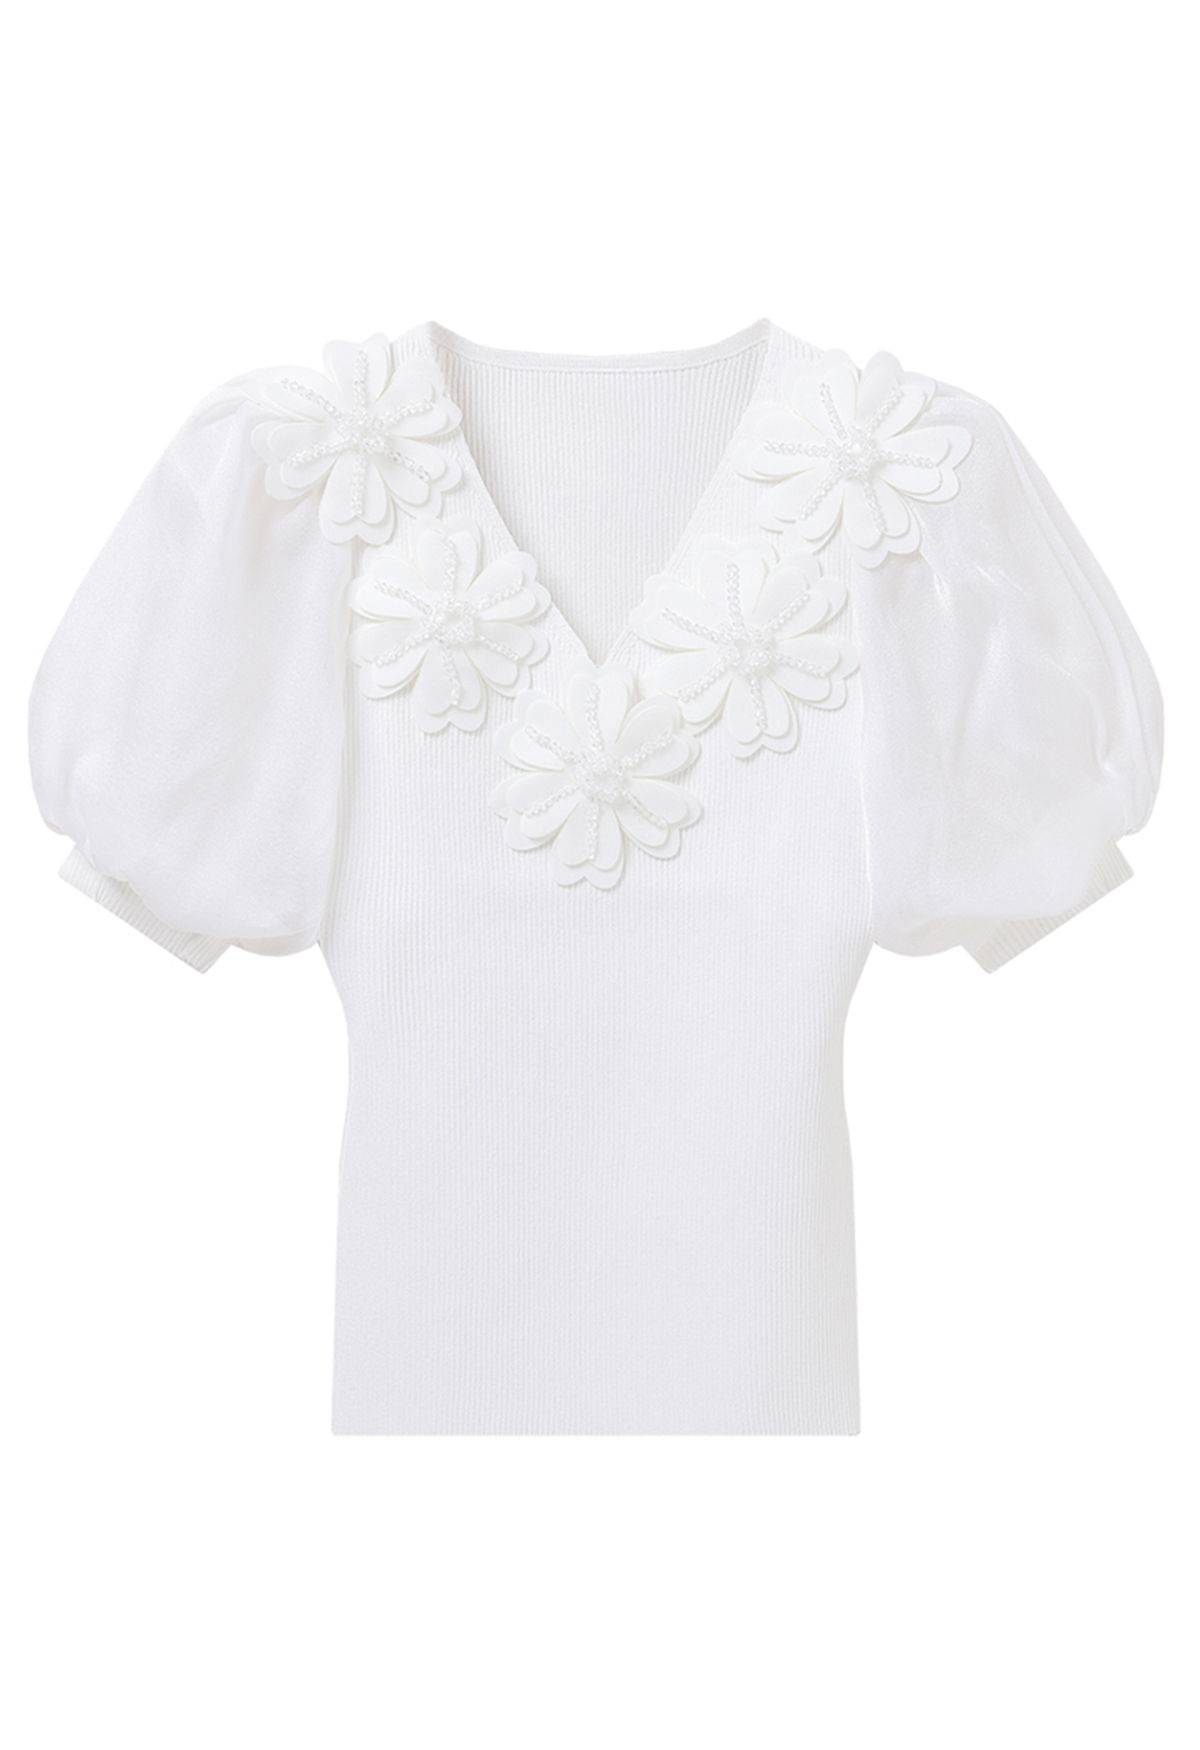 3D Flower Bubble Sleeve Knit Top in White